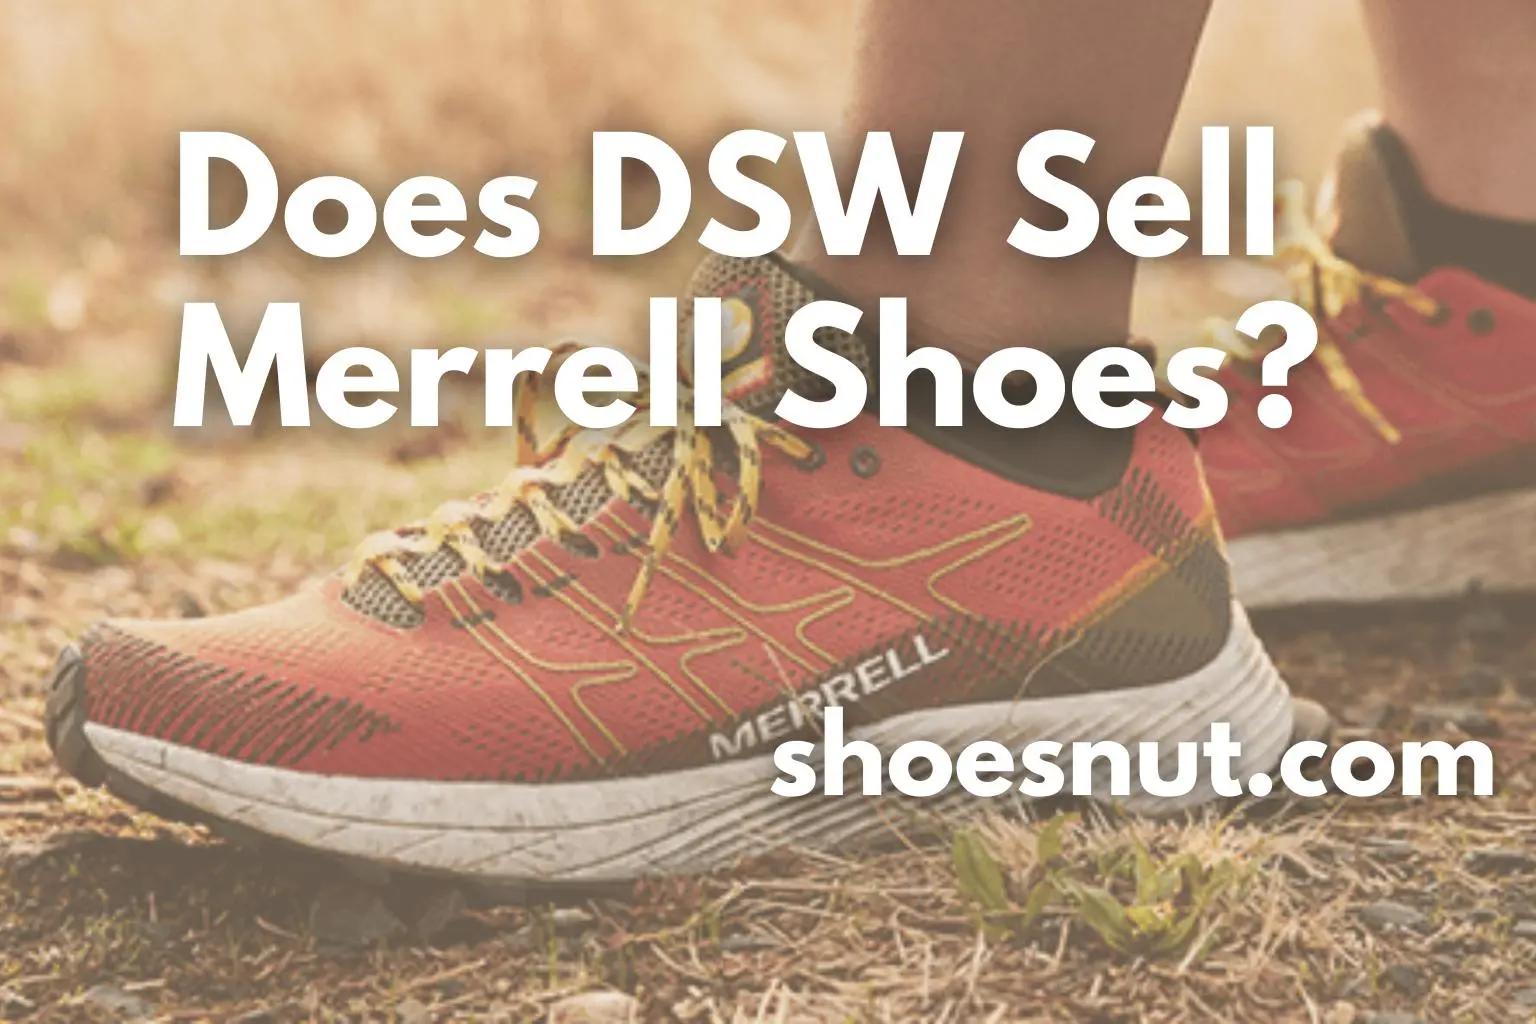 Does DSW Sell Merrell Shoes?